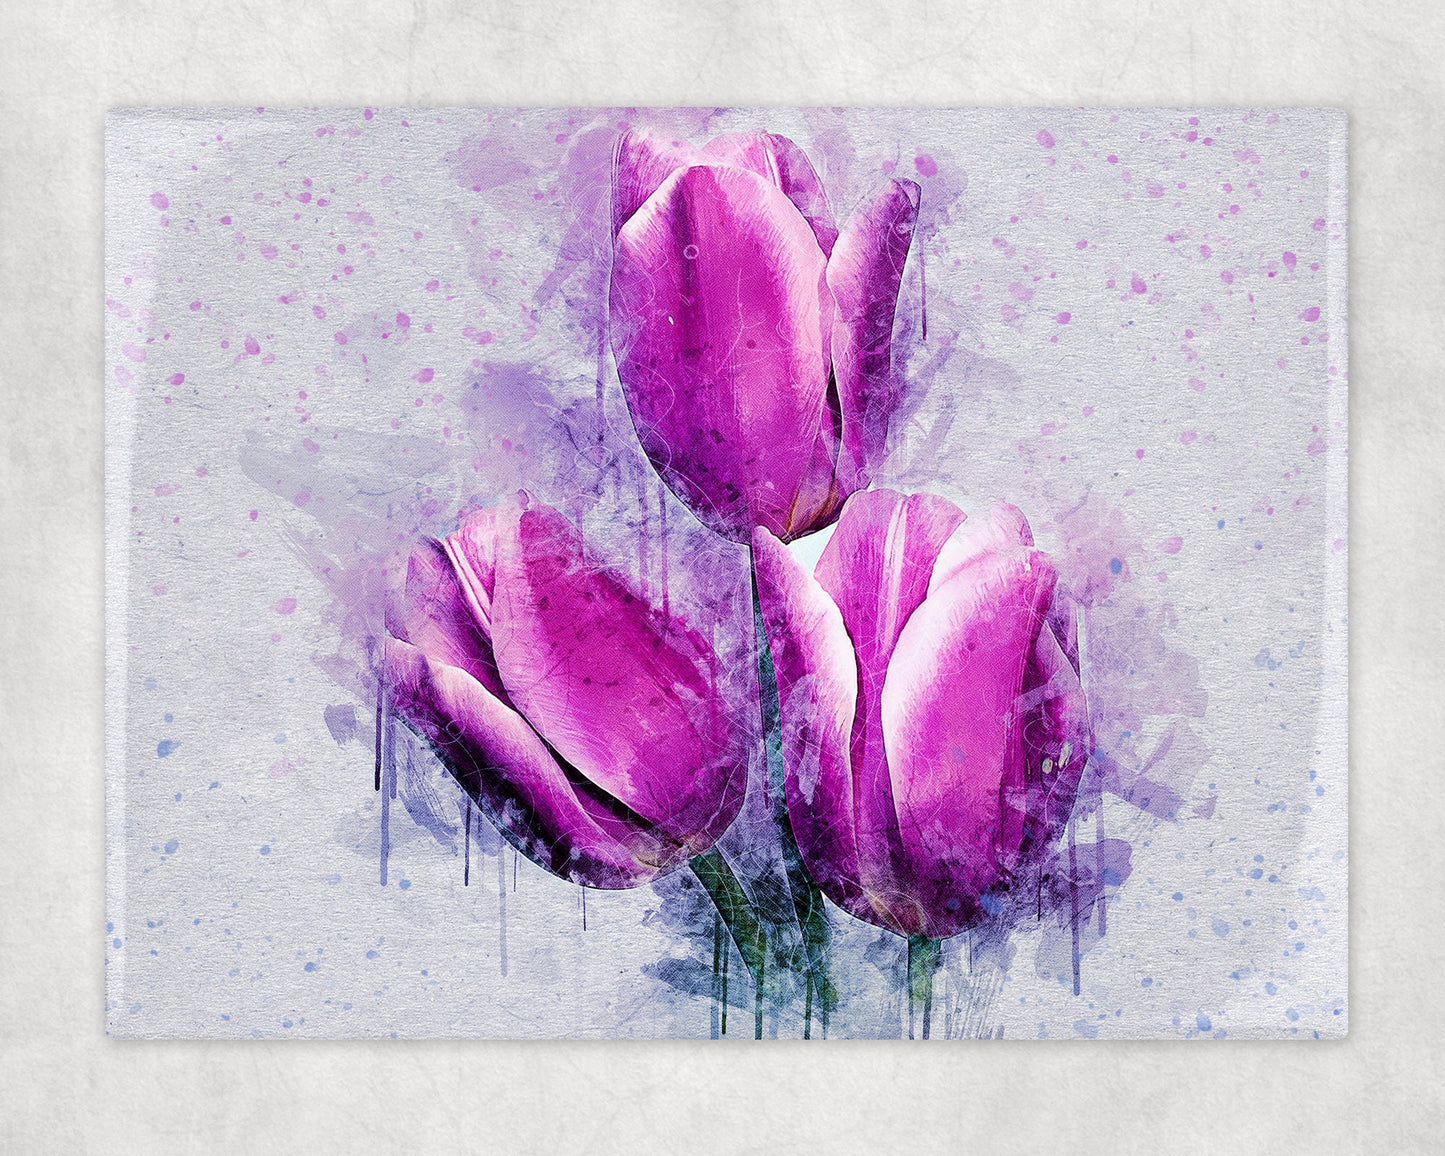 Watercolor Style Purple Tulips Art Decorative Ceramic Tile with Easel Back - 6x8 inches